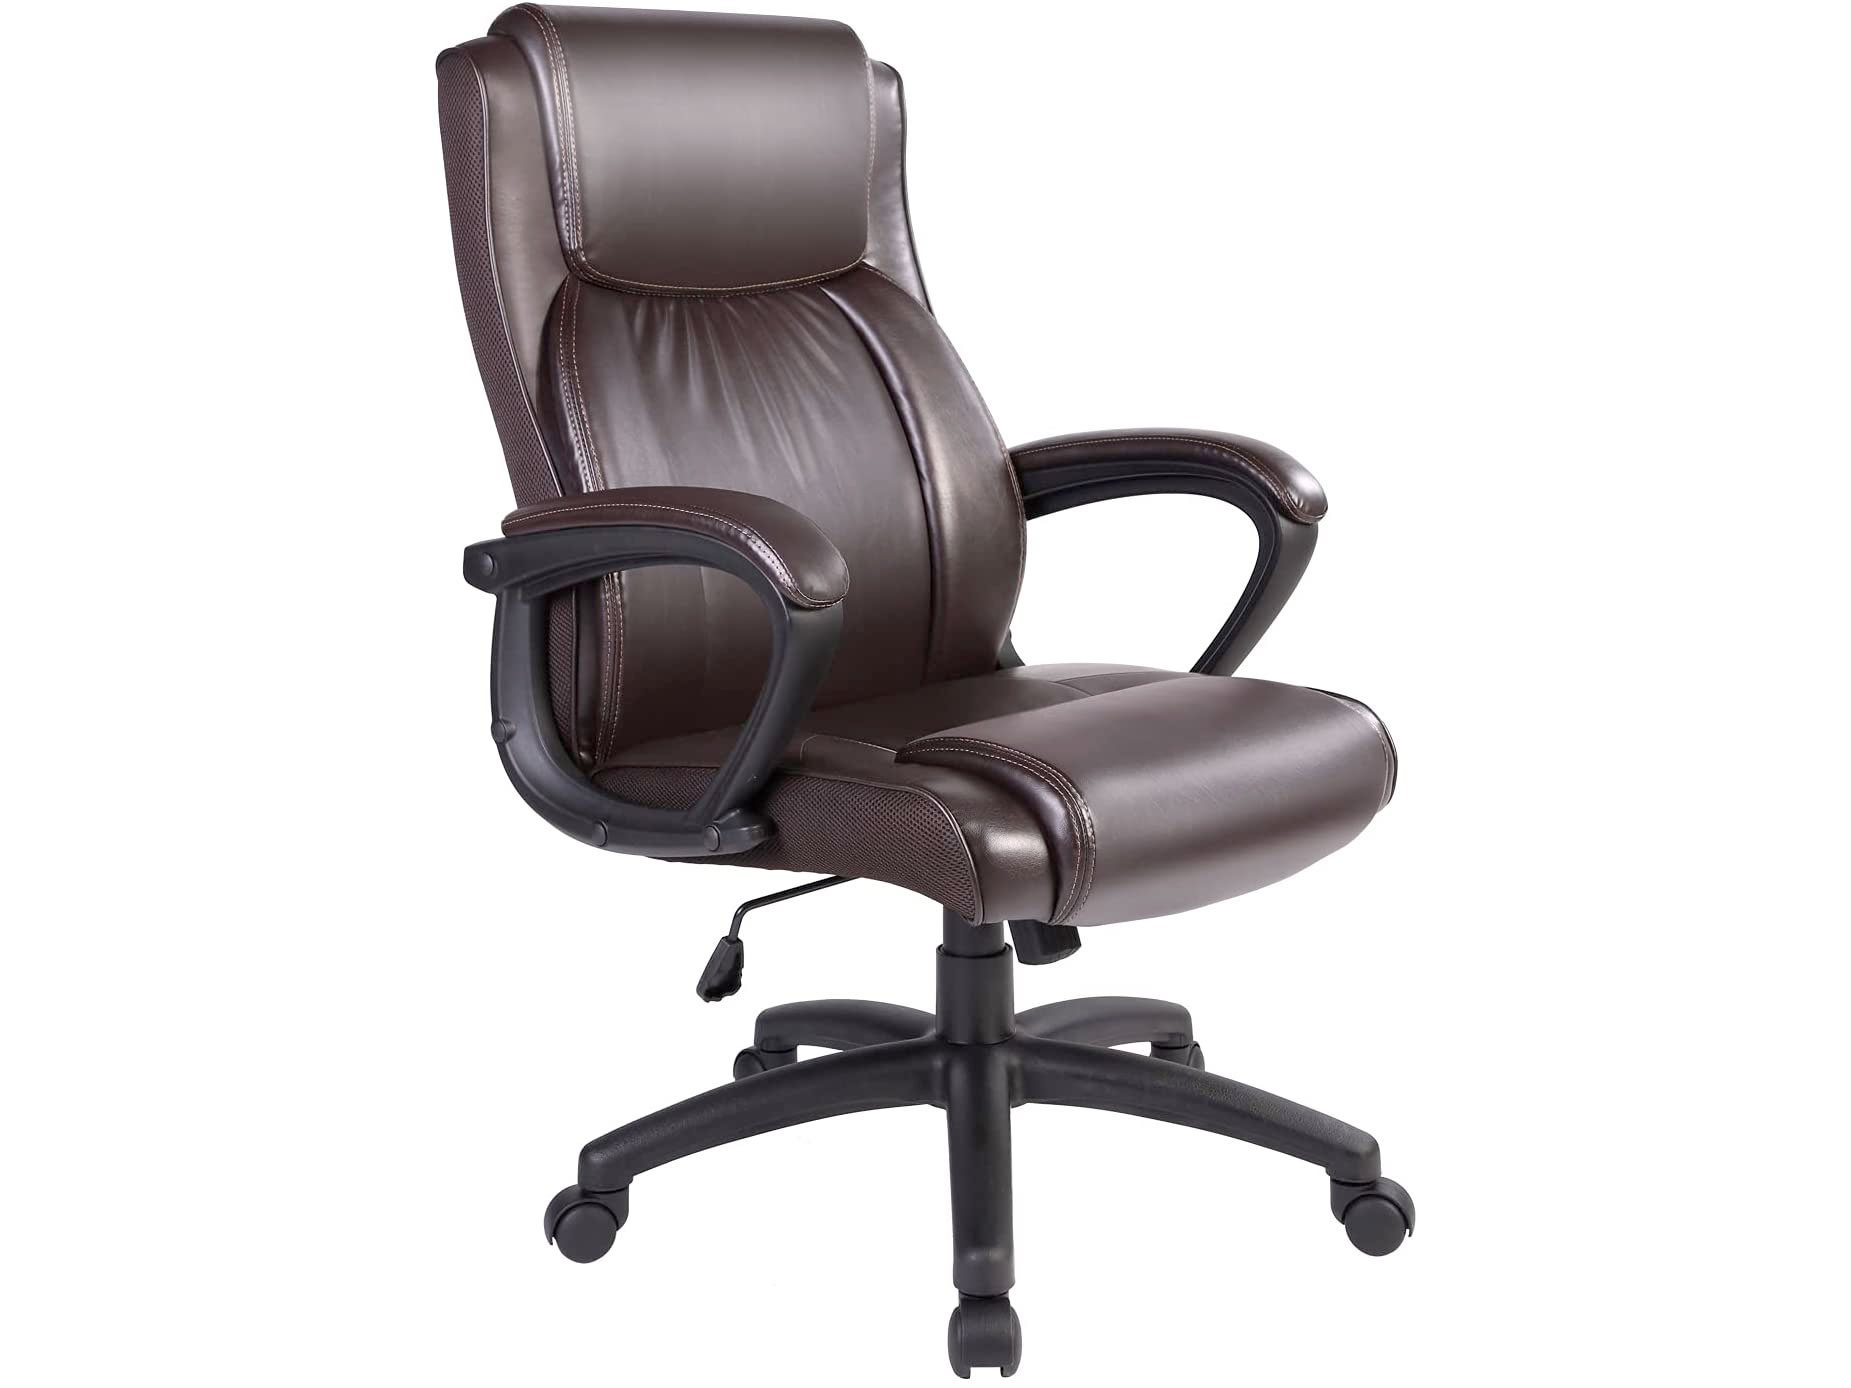 Amazon：Executive Office Leather Chair只卖$135.99